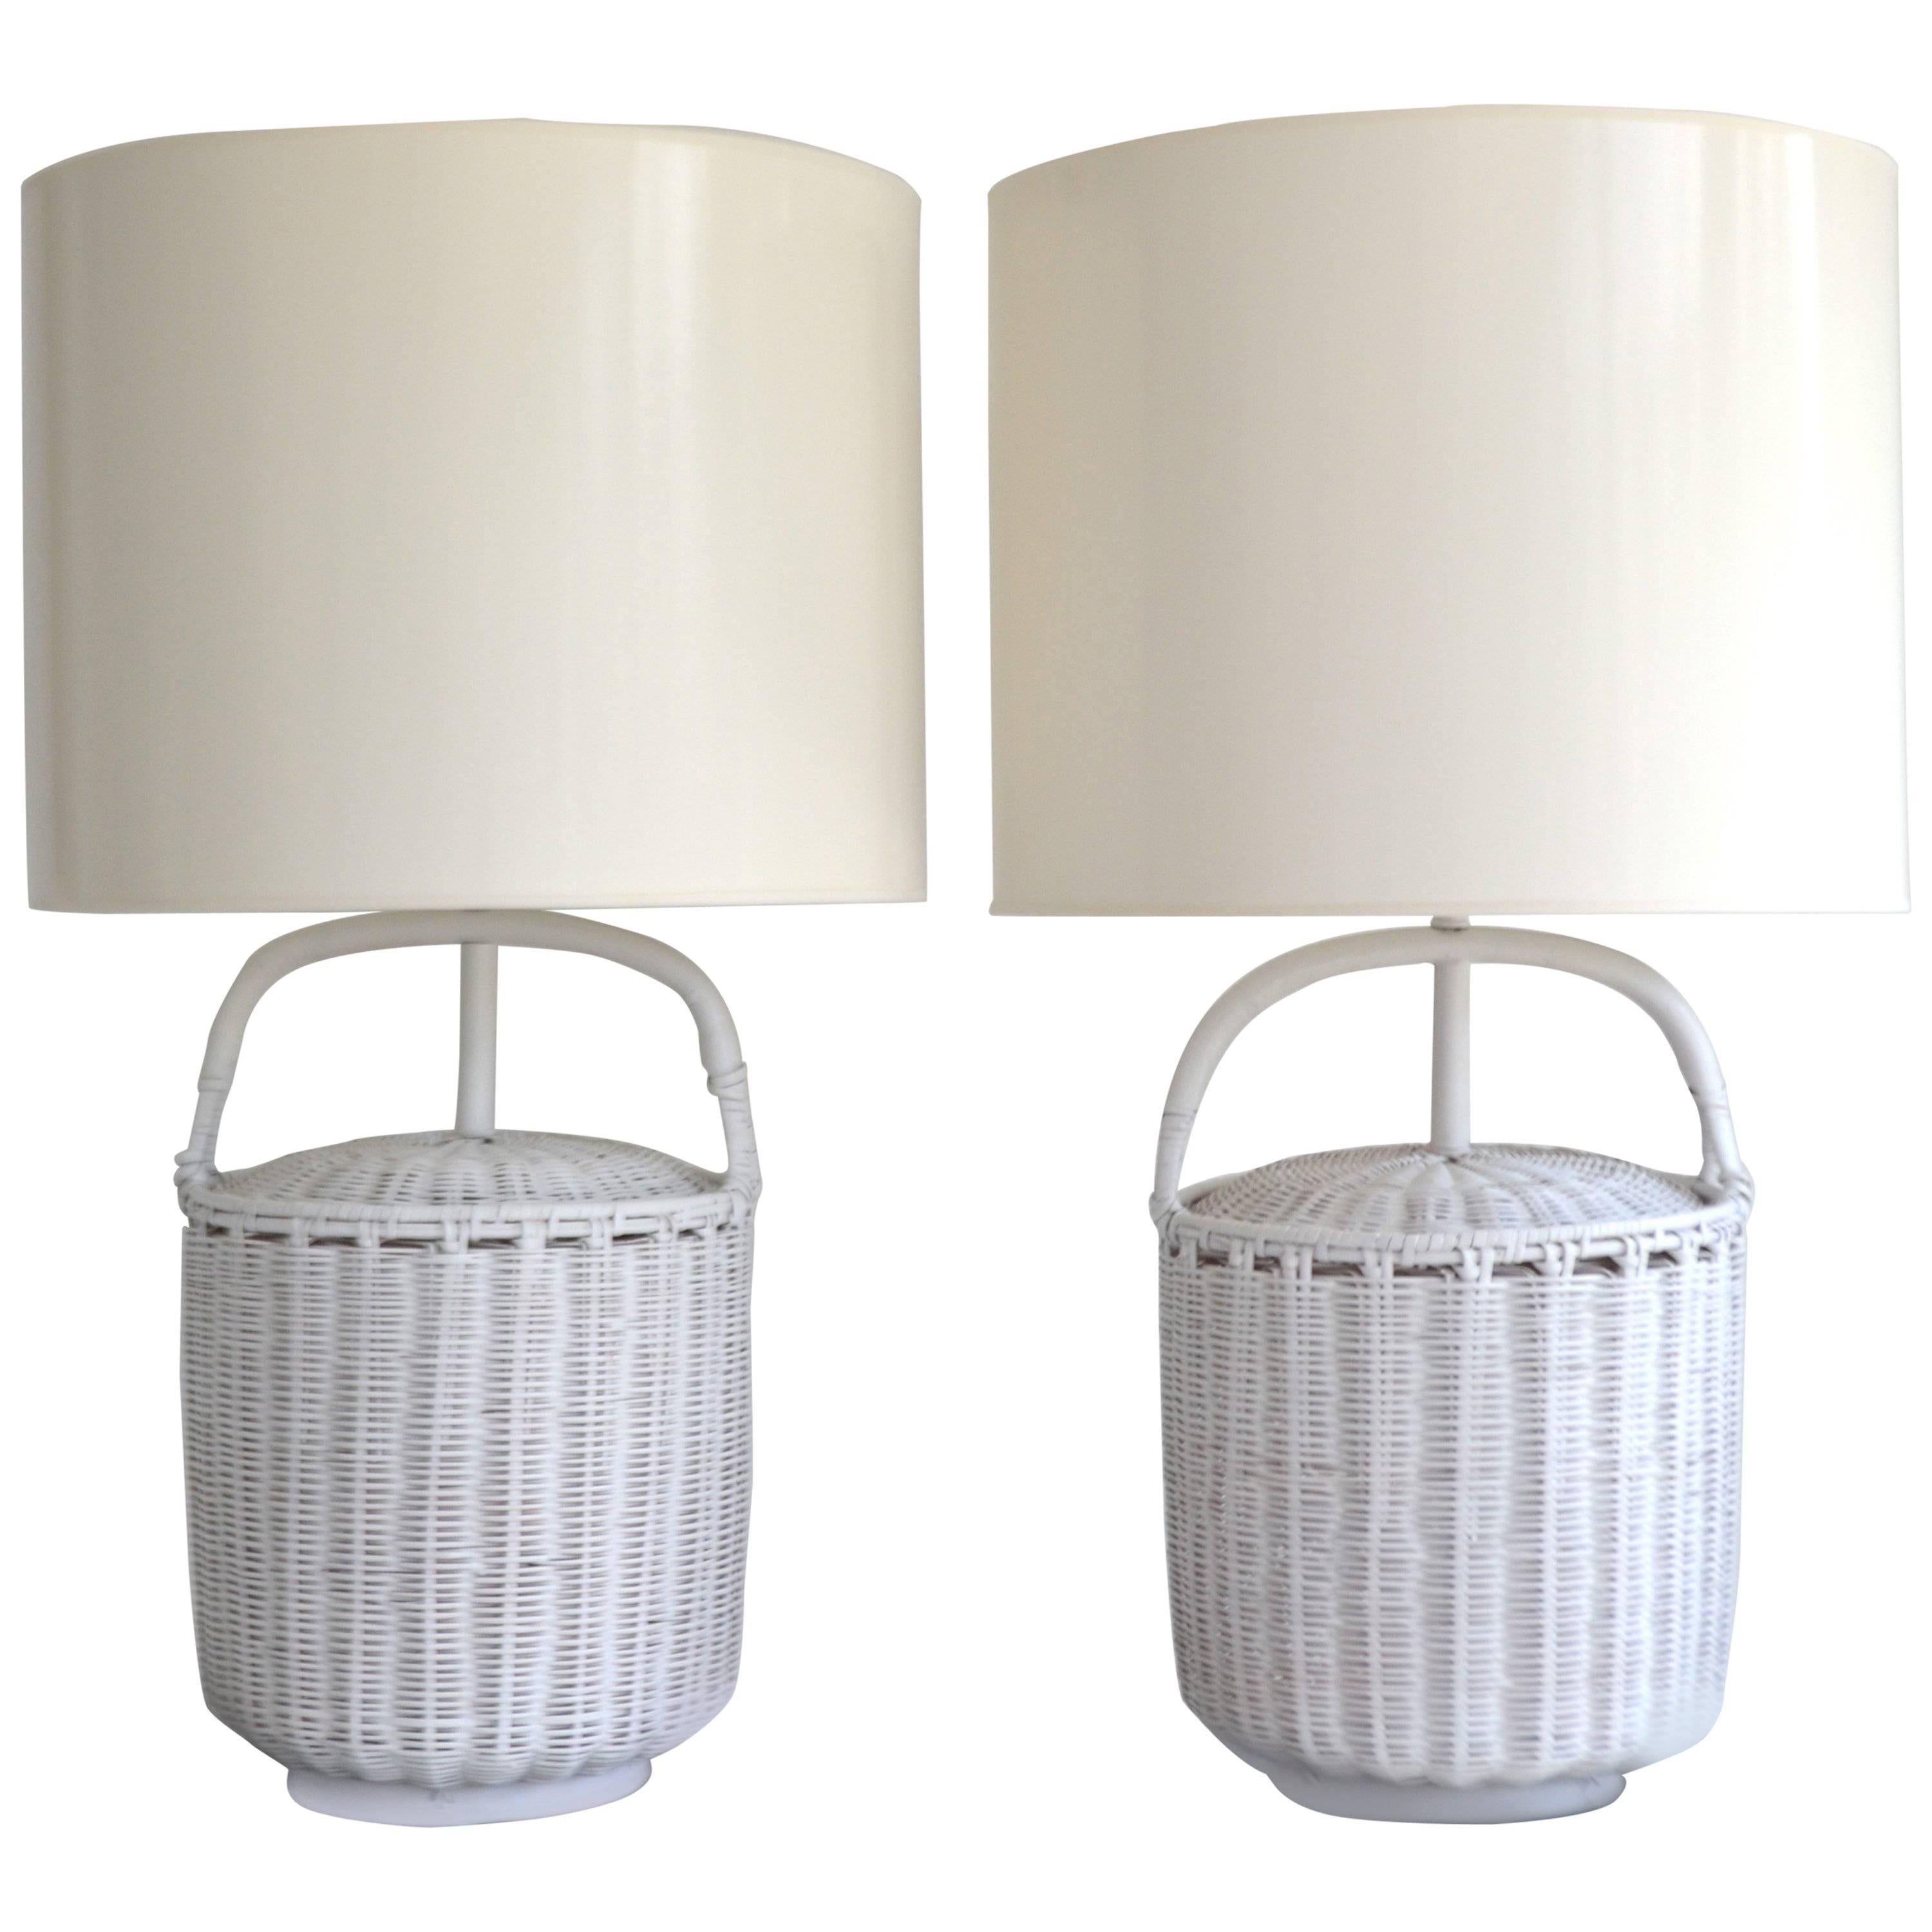 Pair of Midcentury Woven Reed Basket Form Table Lamps For Sale